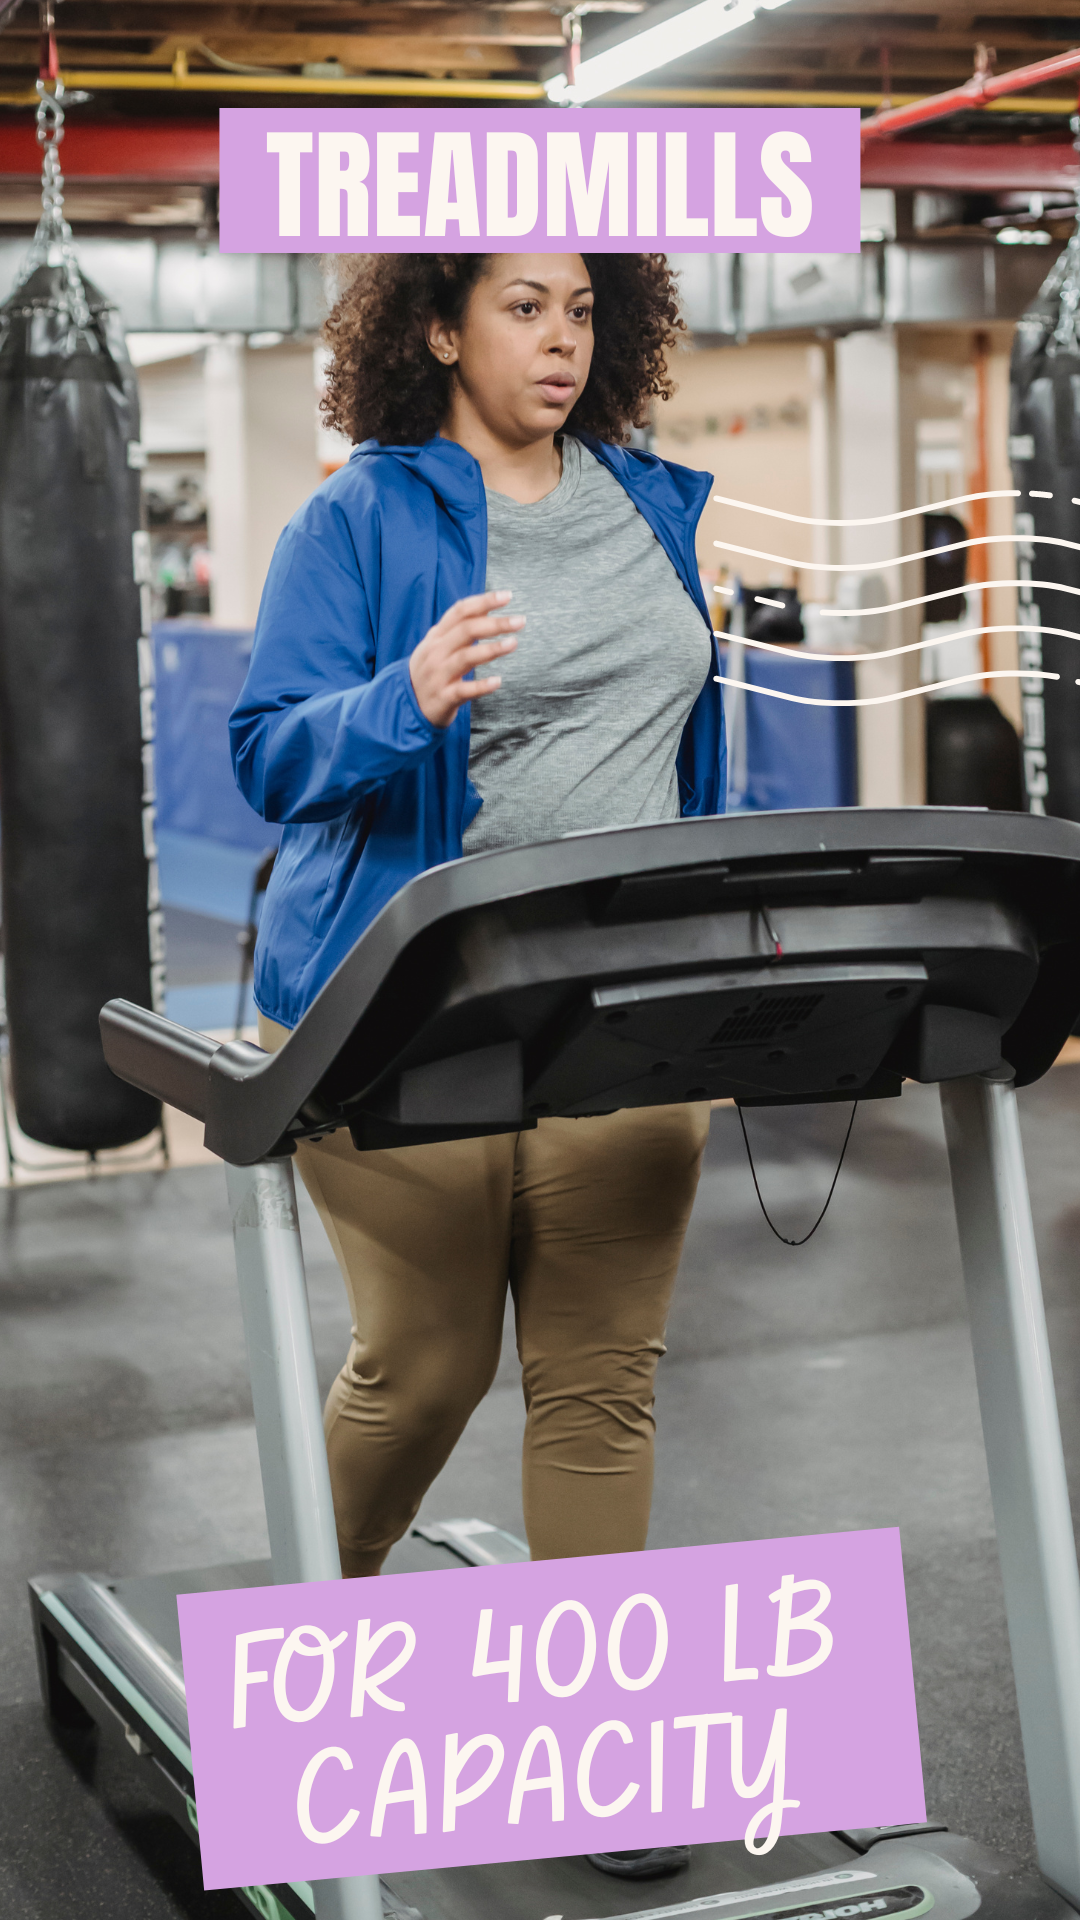 9 Best Treadmills With 400 lb Capacity to Lose Weight in 2023 | by AnilKK |  Medium